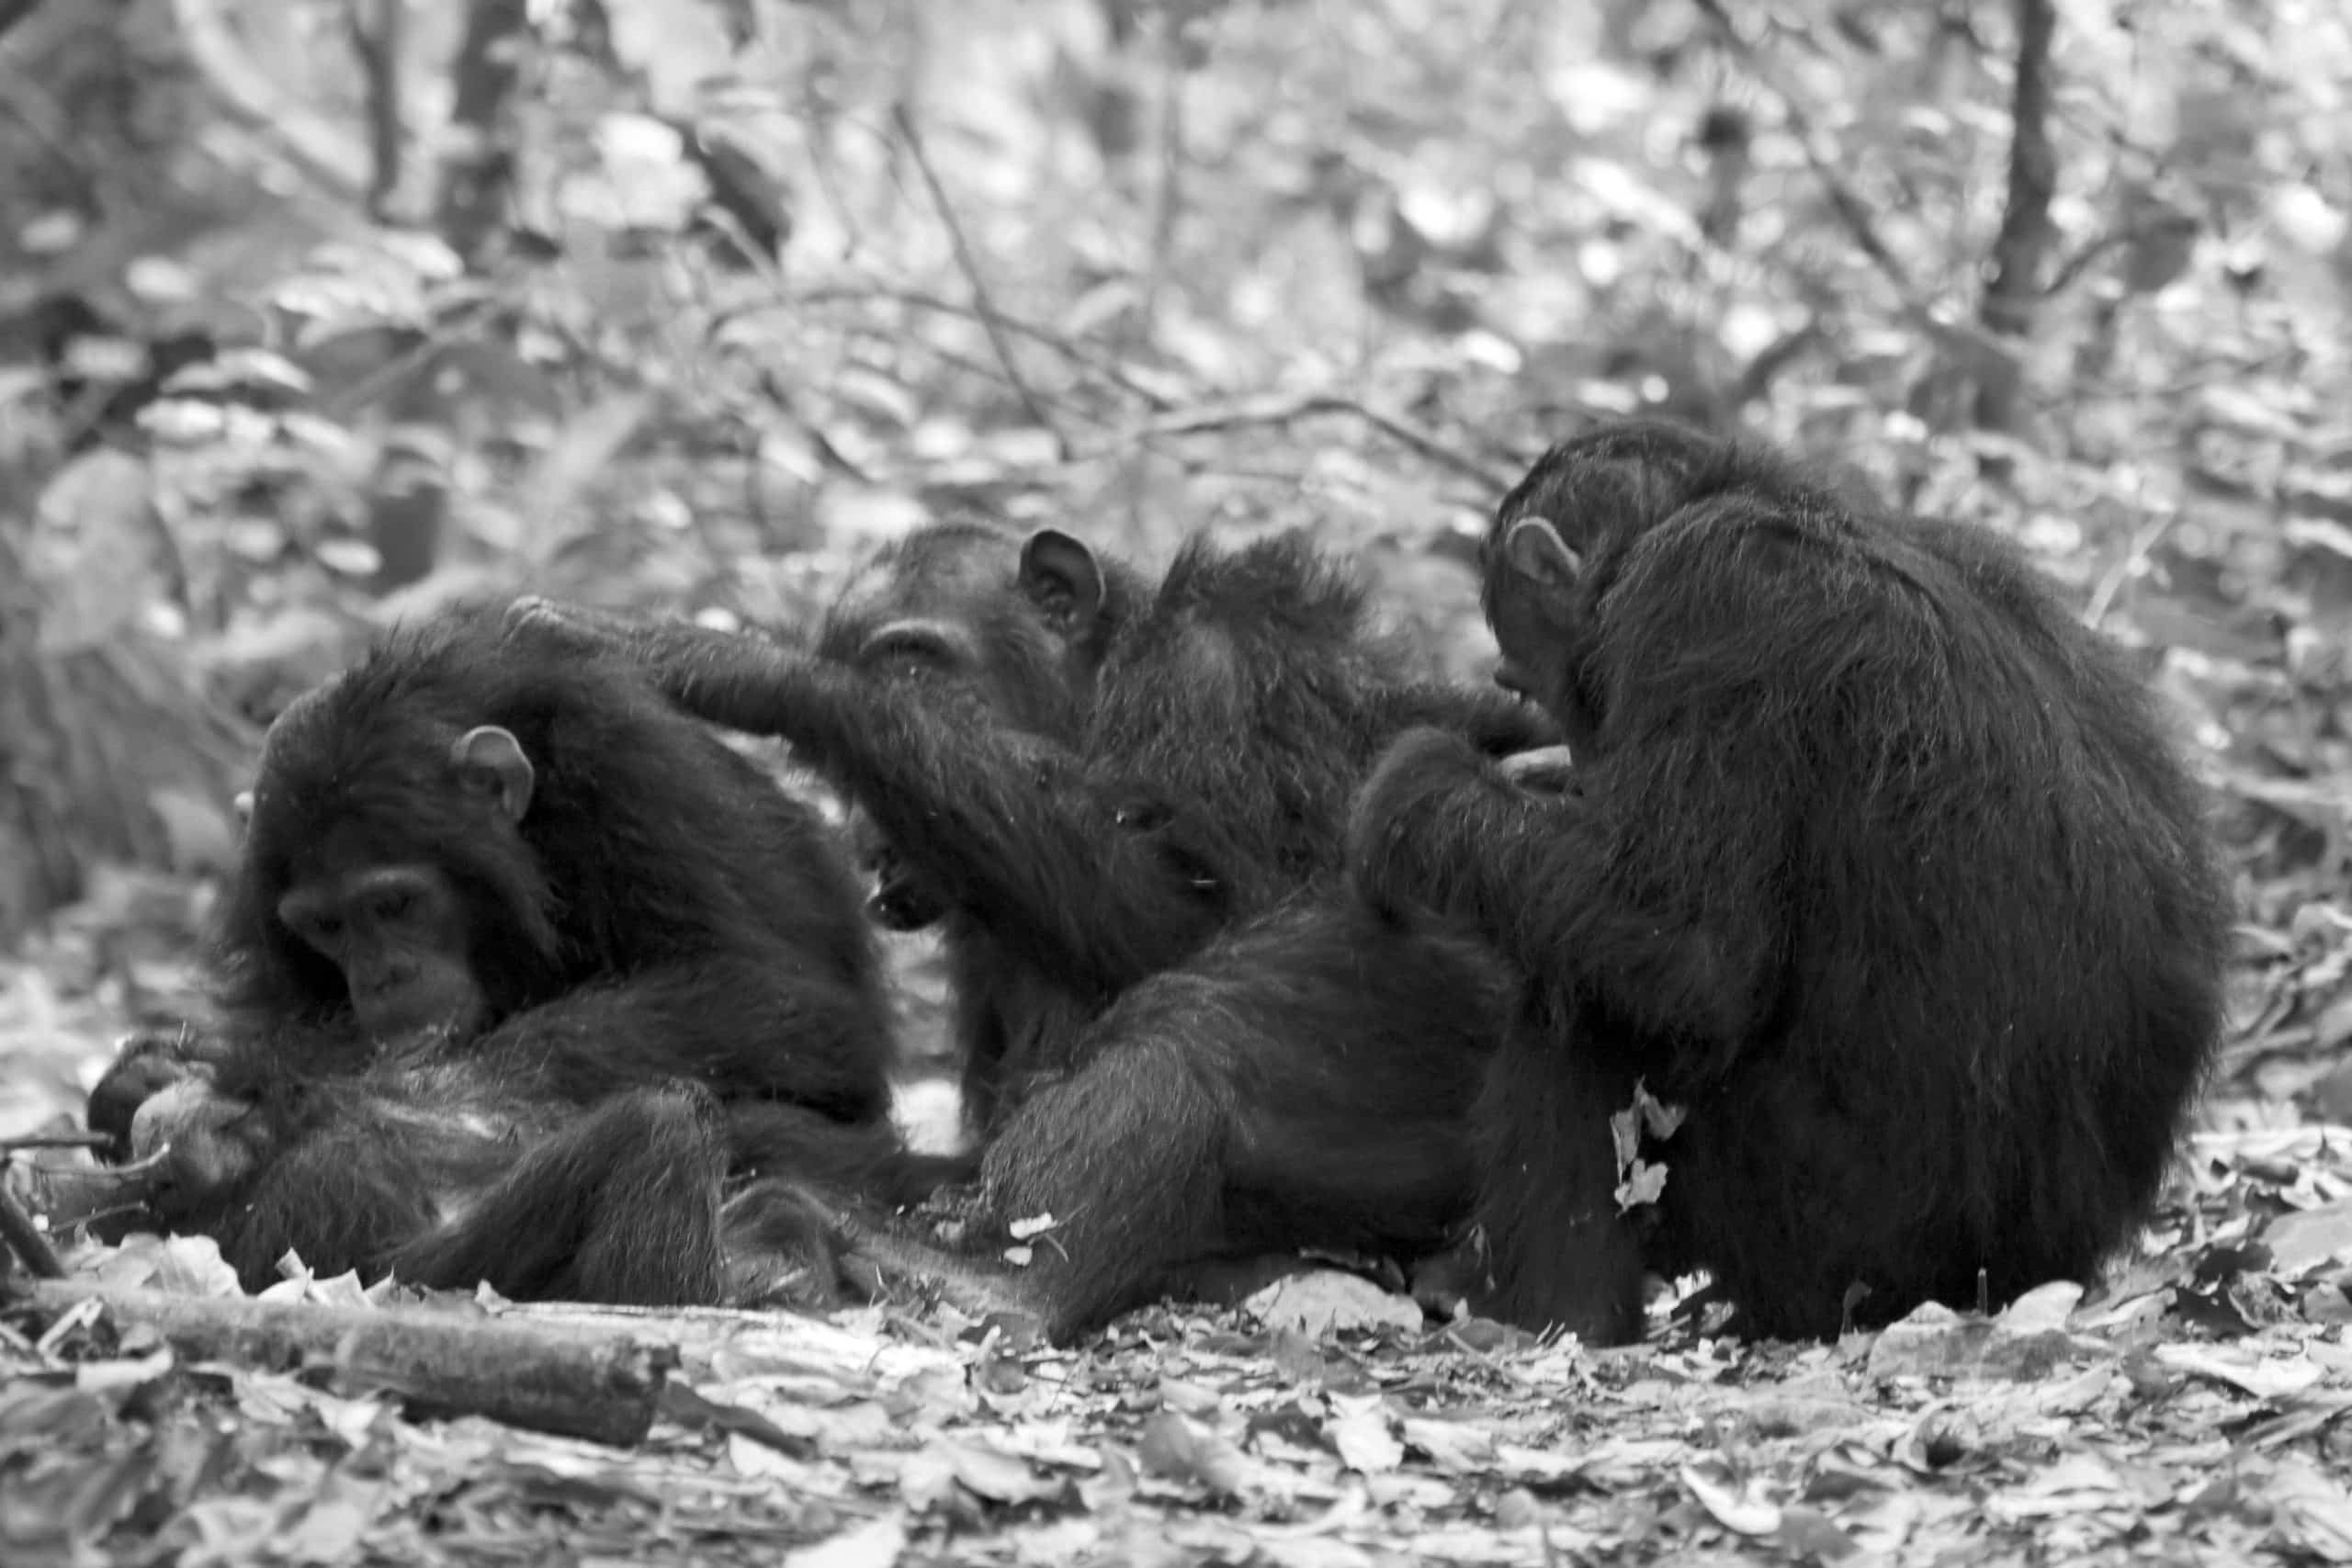 Observation of Chimpanzee social life at the Gombe National Park